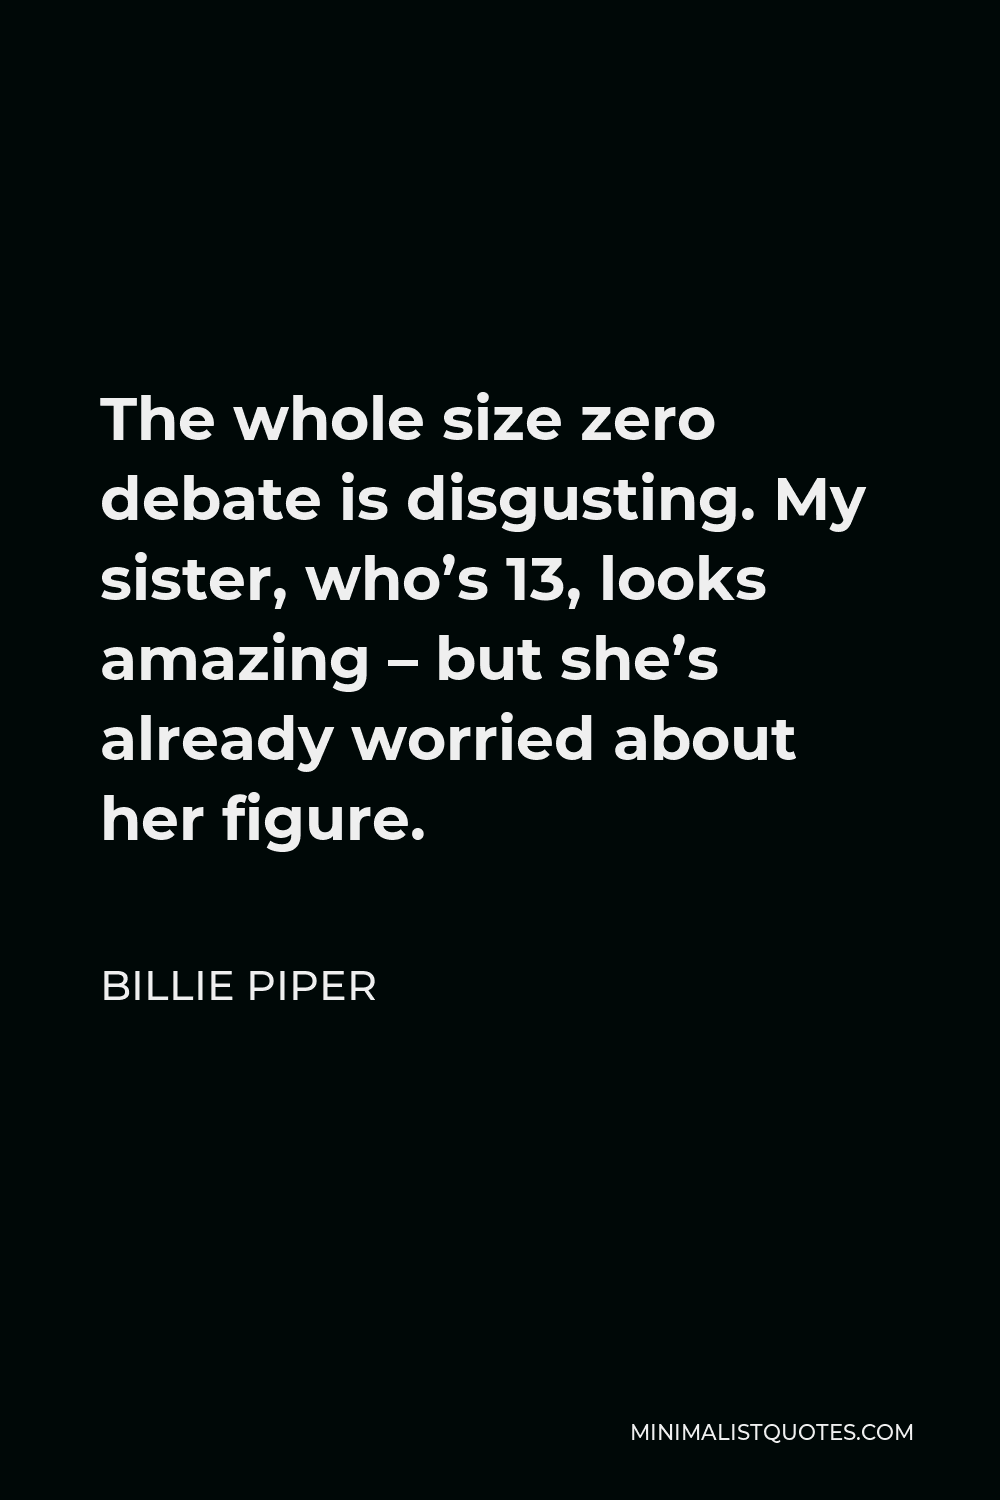 Billie Piper Quote - The whole size zero debate is disgusting. My sister, who’s 13, looks amazing – but she’s already worried about her figure.